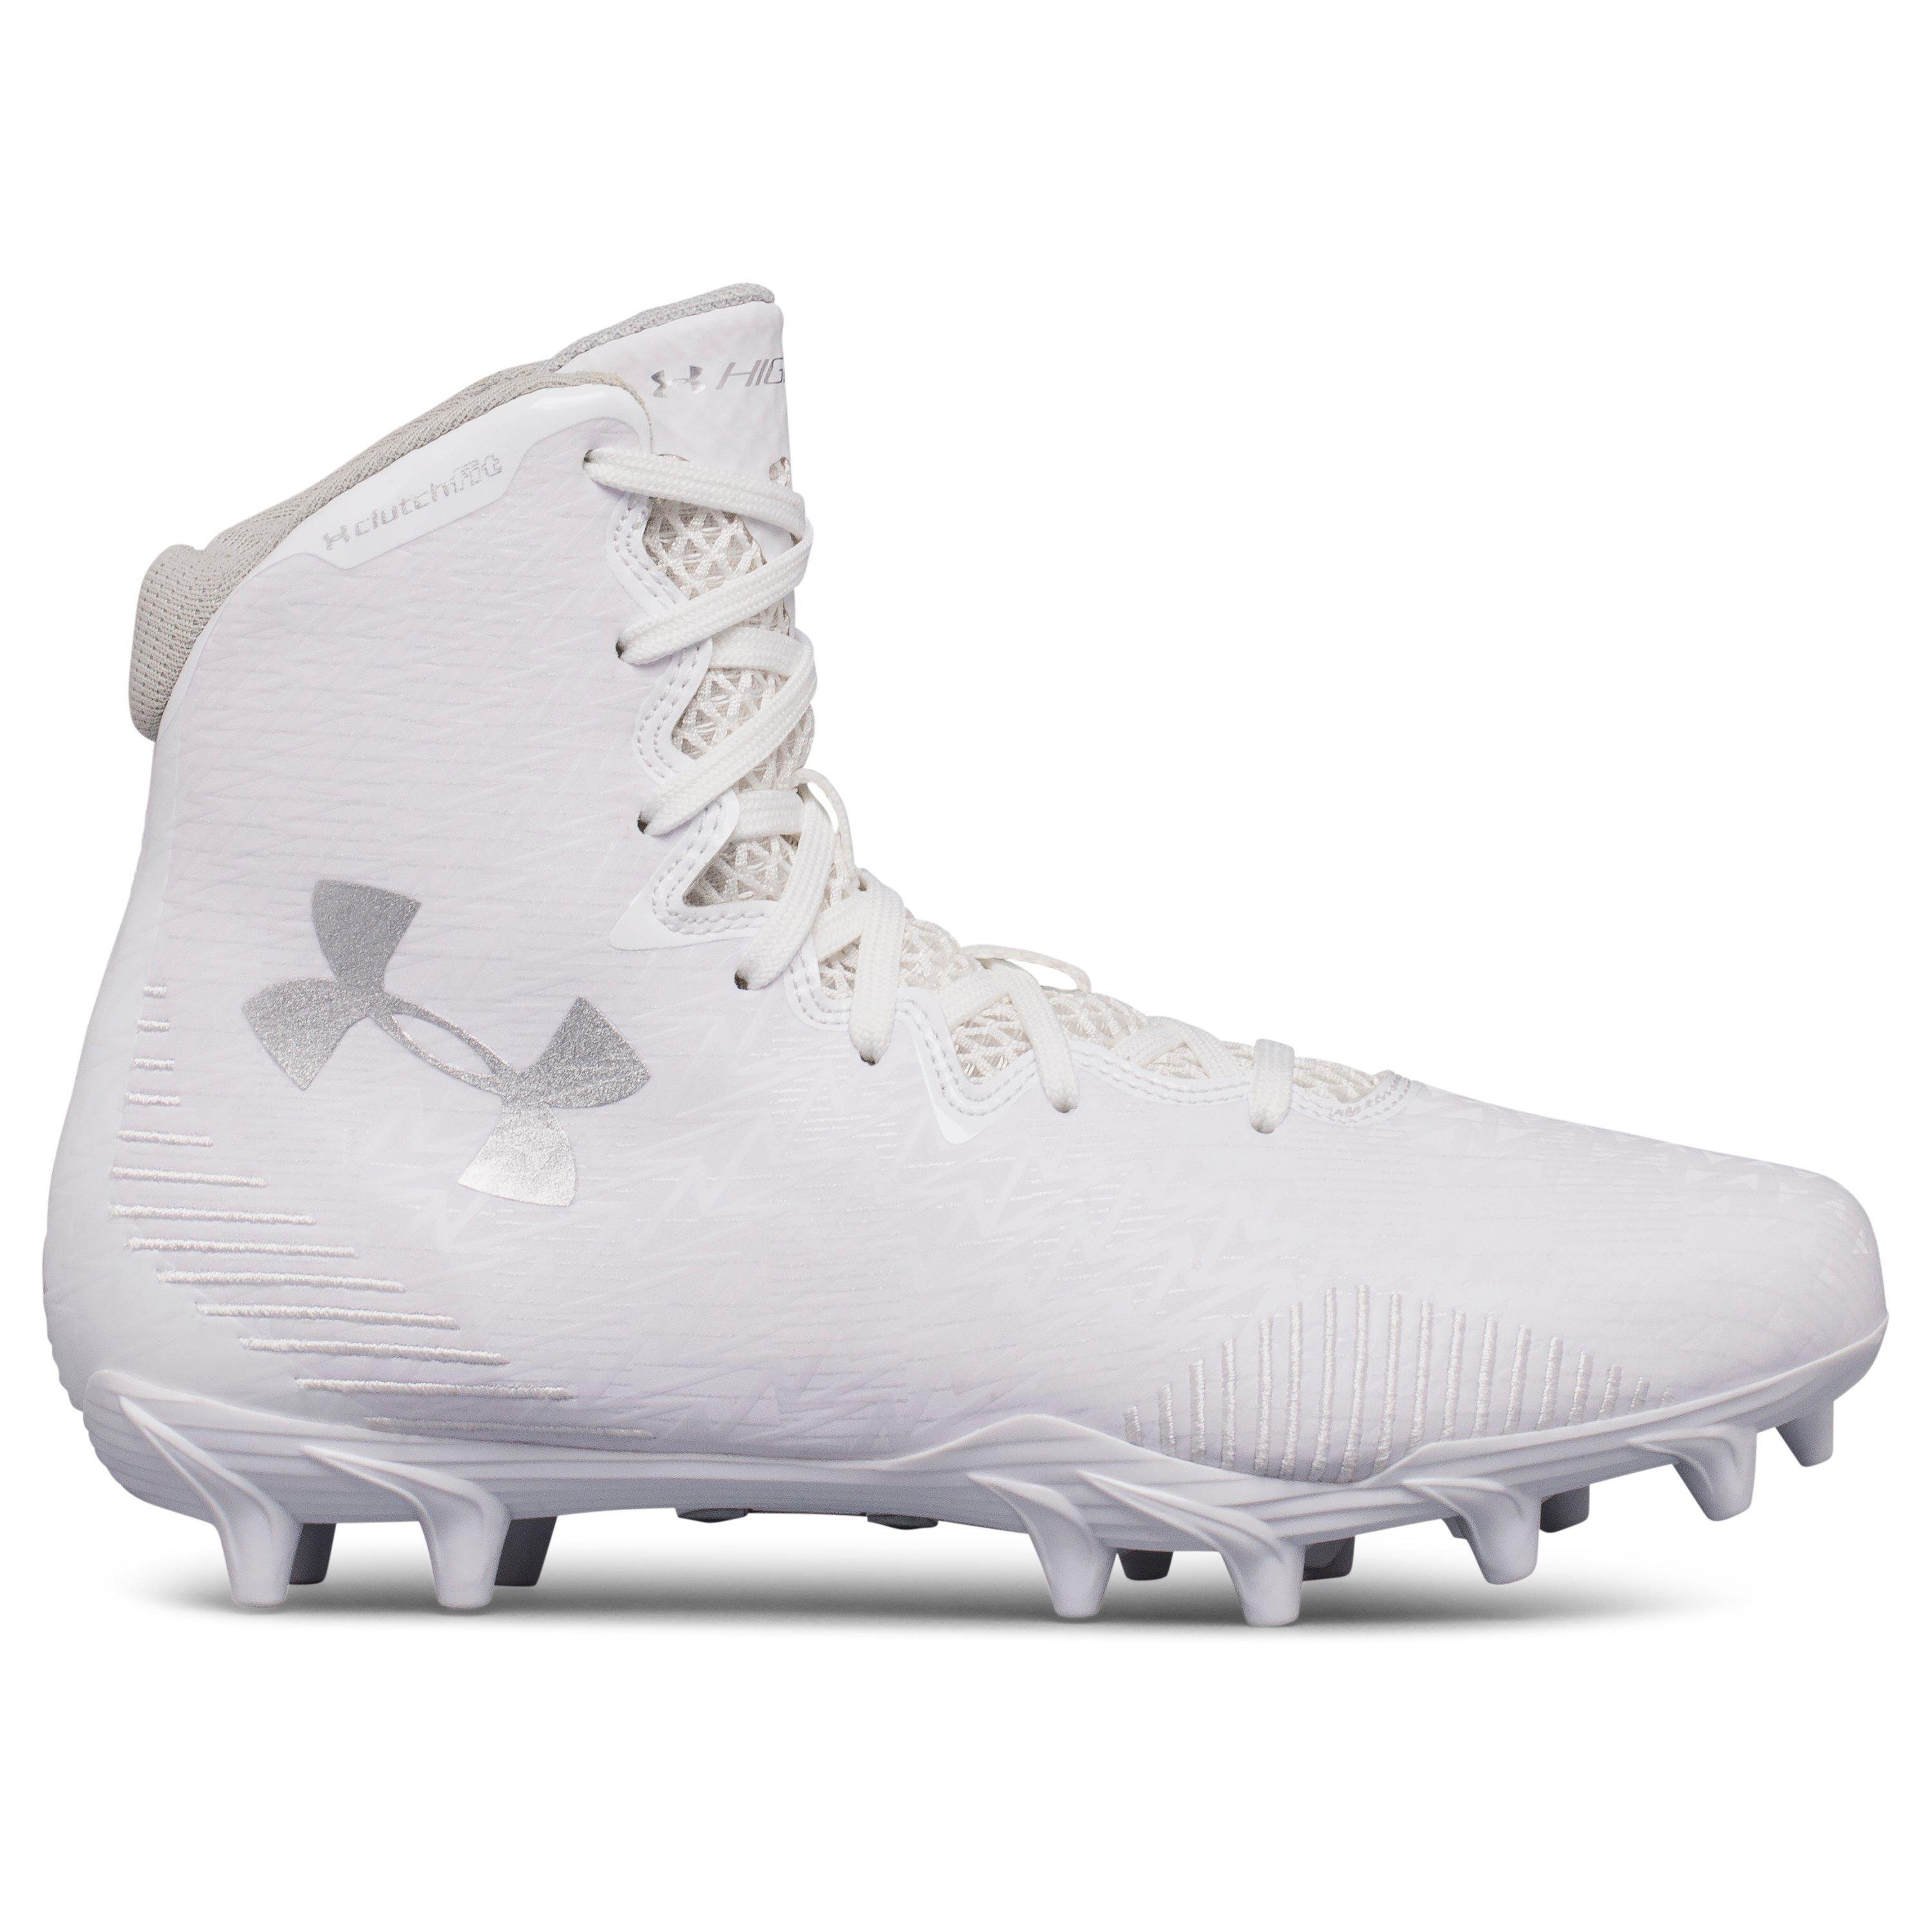 Under Armour Women's Ua Highlight Molded Lacrosse Cleats in White for Men |  Lyst